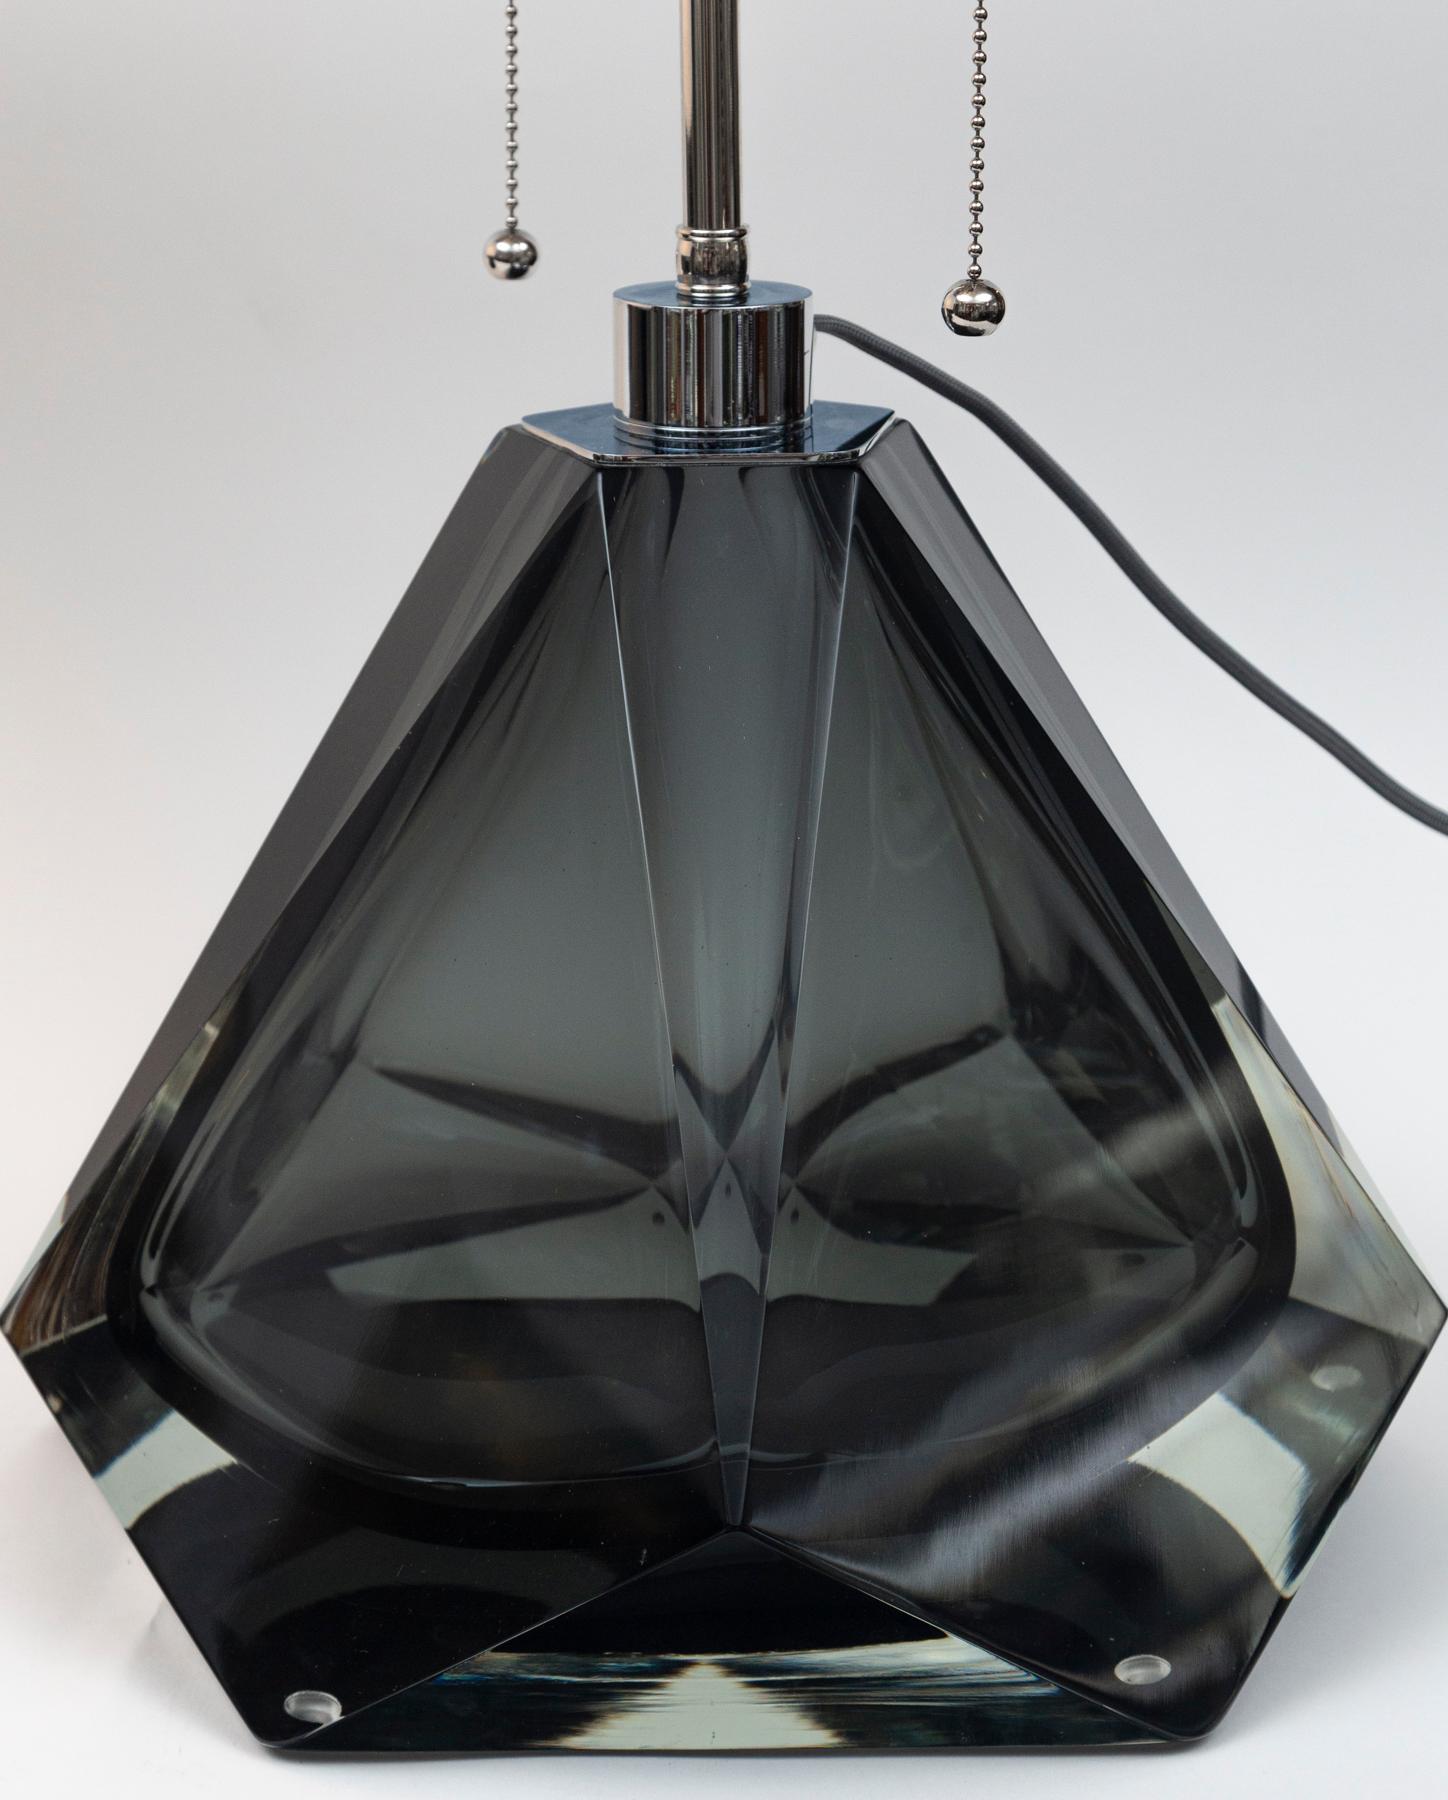 Modern Artisan blown and polished gem faceted lamps in a stunning gunmetal grey tone, note these are glass enclosed at the base
Electrified to code with UL approved parts, hardware in  polished nickel on brass with pull chains  for 2 medium base